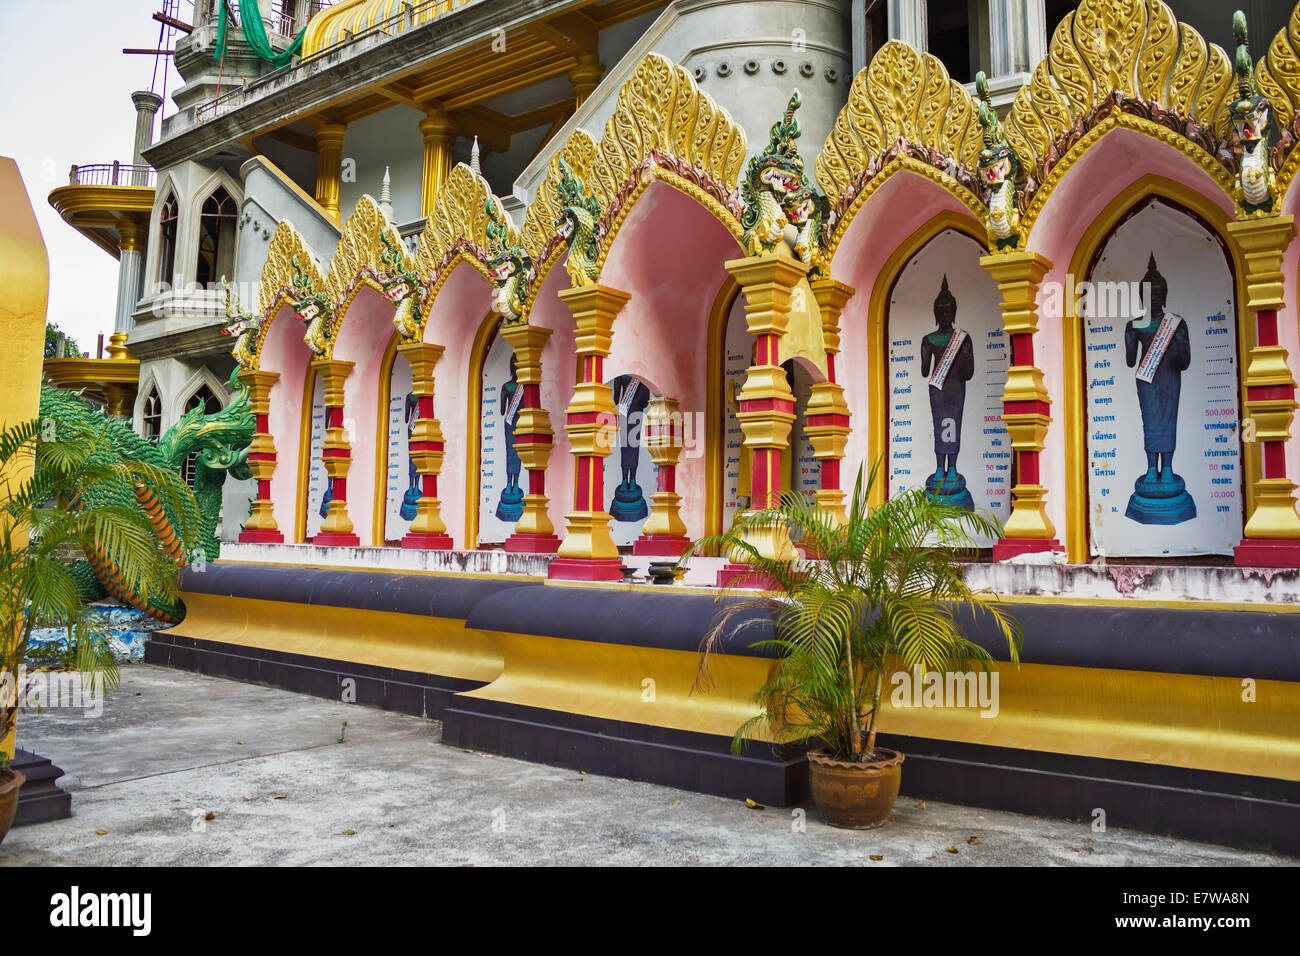 PHUKET, THAILAND - FEBRUARY 11, 2013: Buddhist temple in the south of Thailand Stock Photo